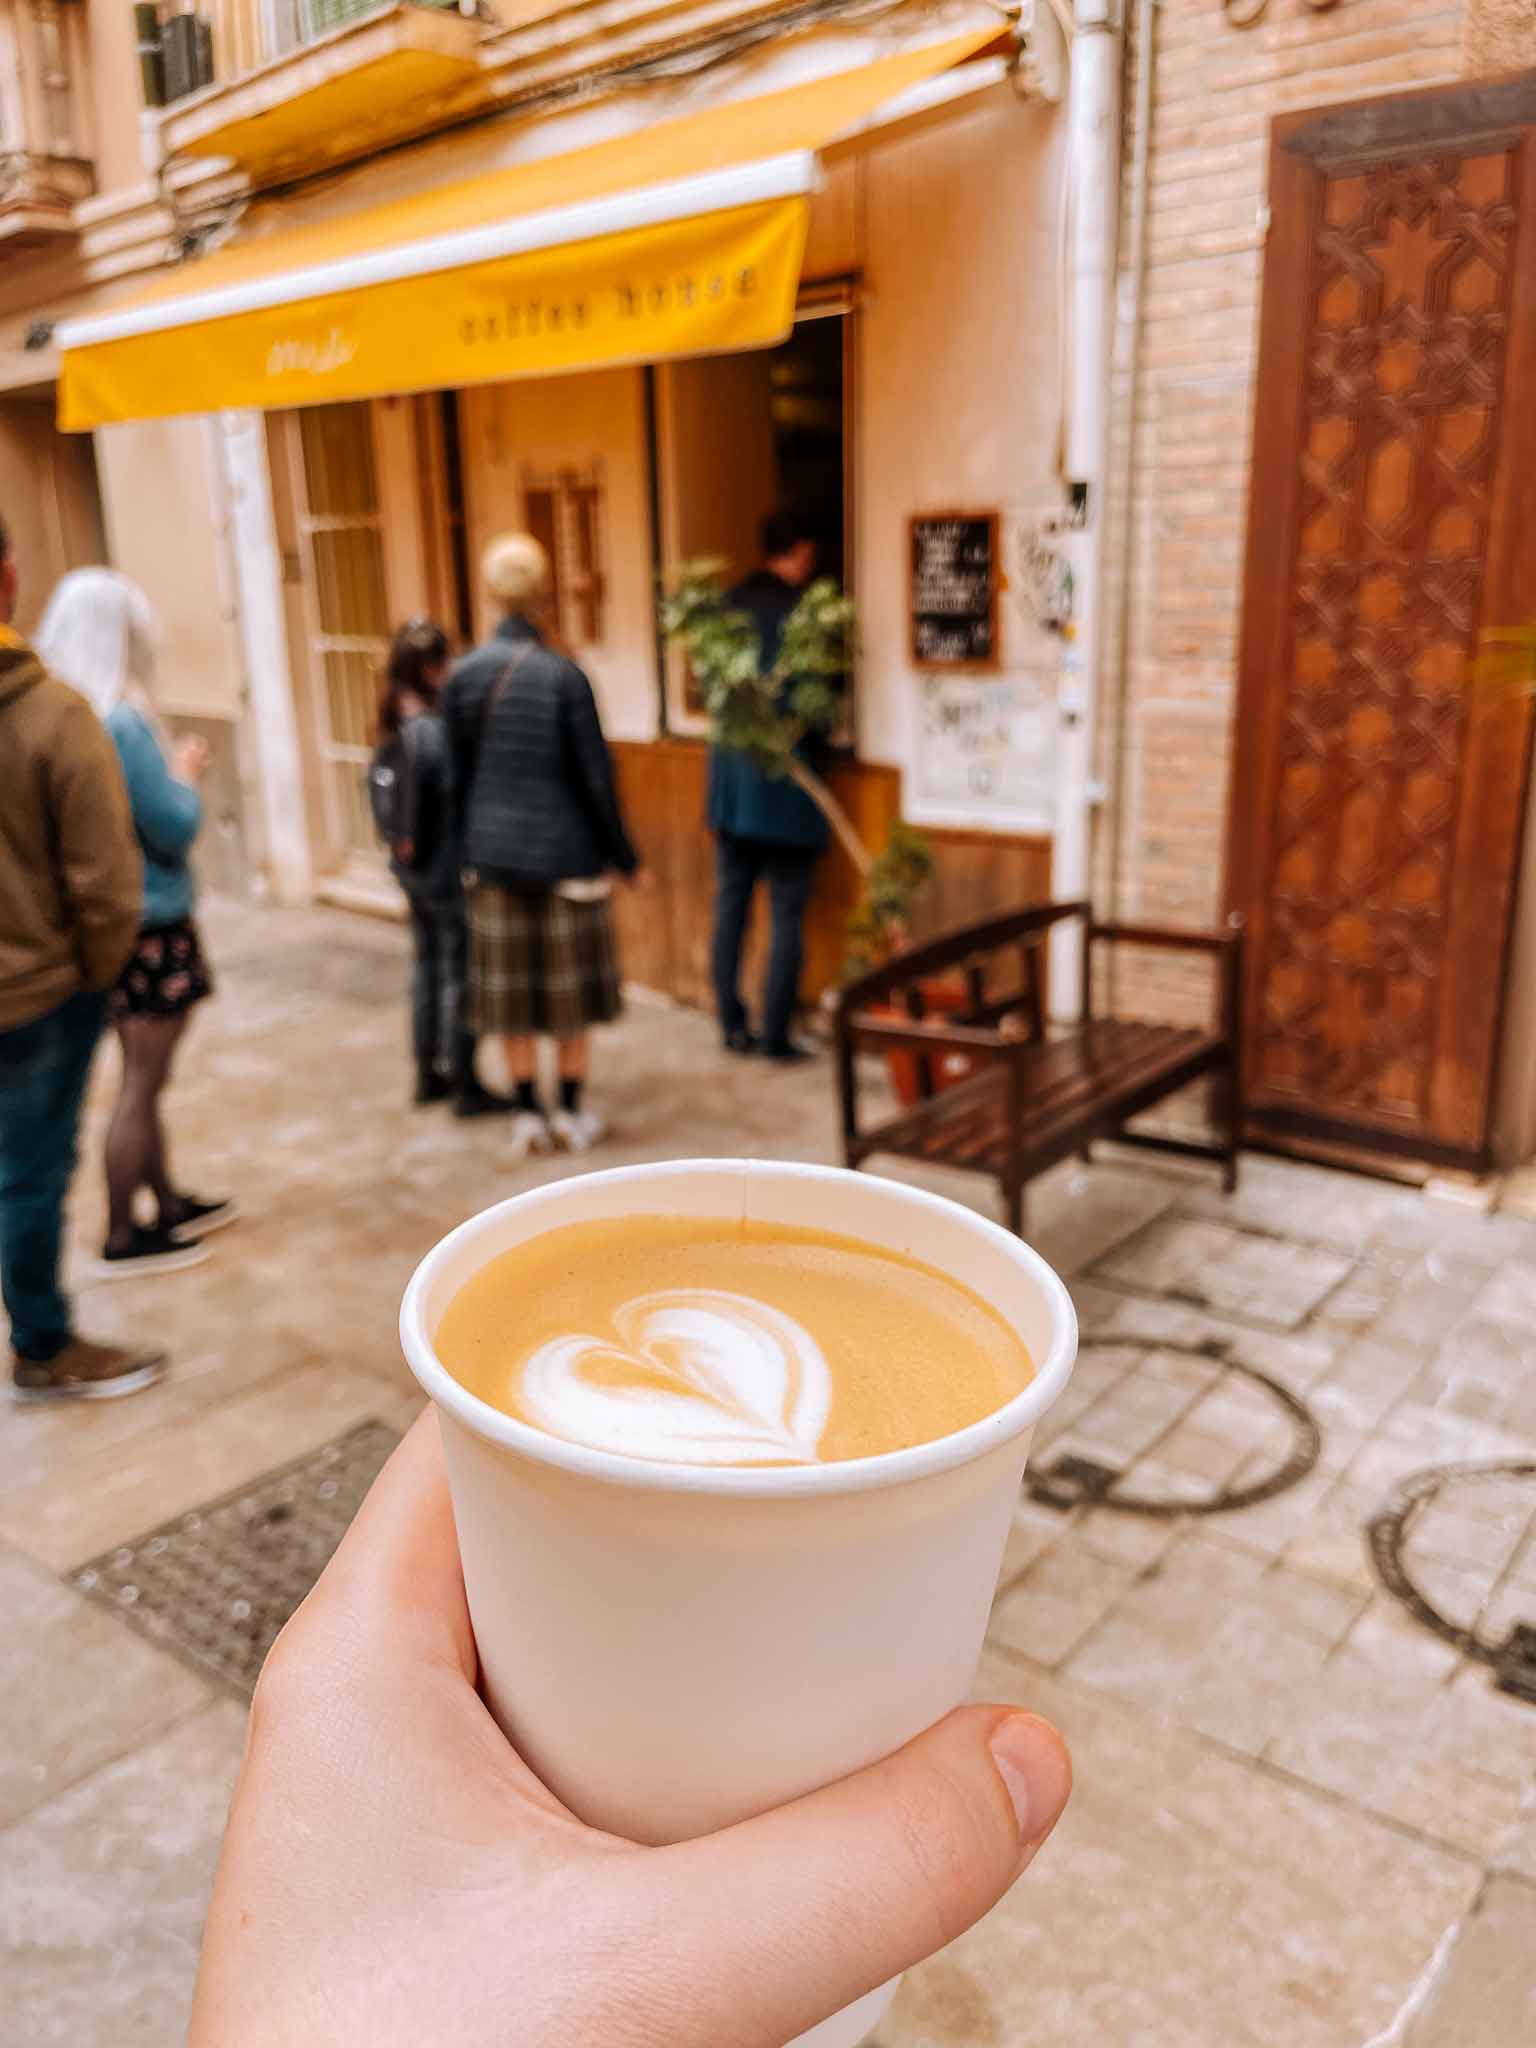 Breakfast, brunch and specialty coffee cafes and restaurants in Malaga, Spain